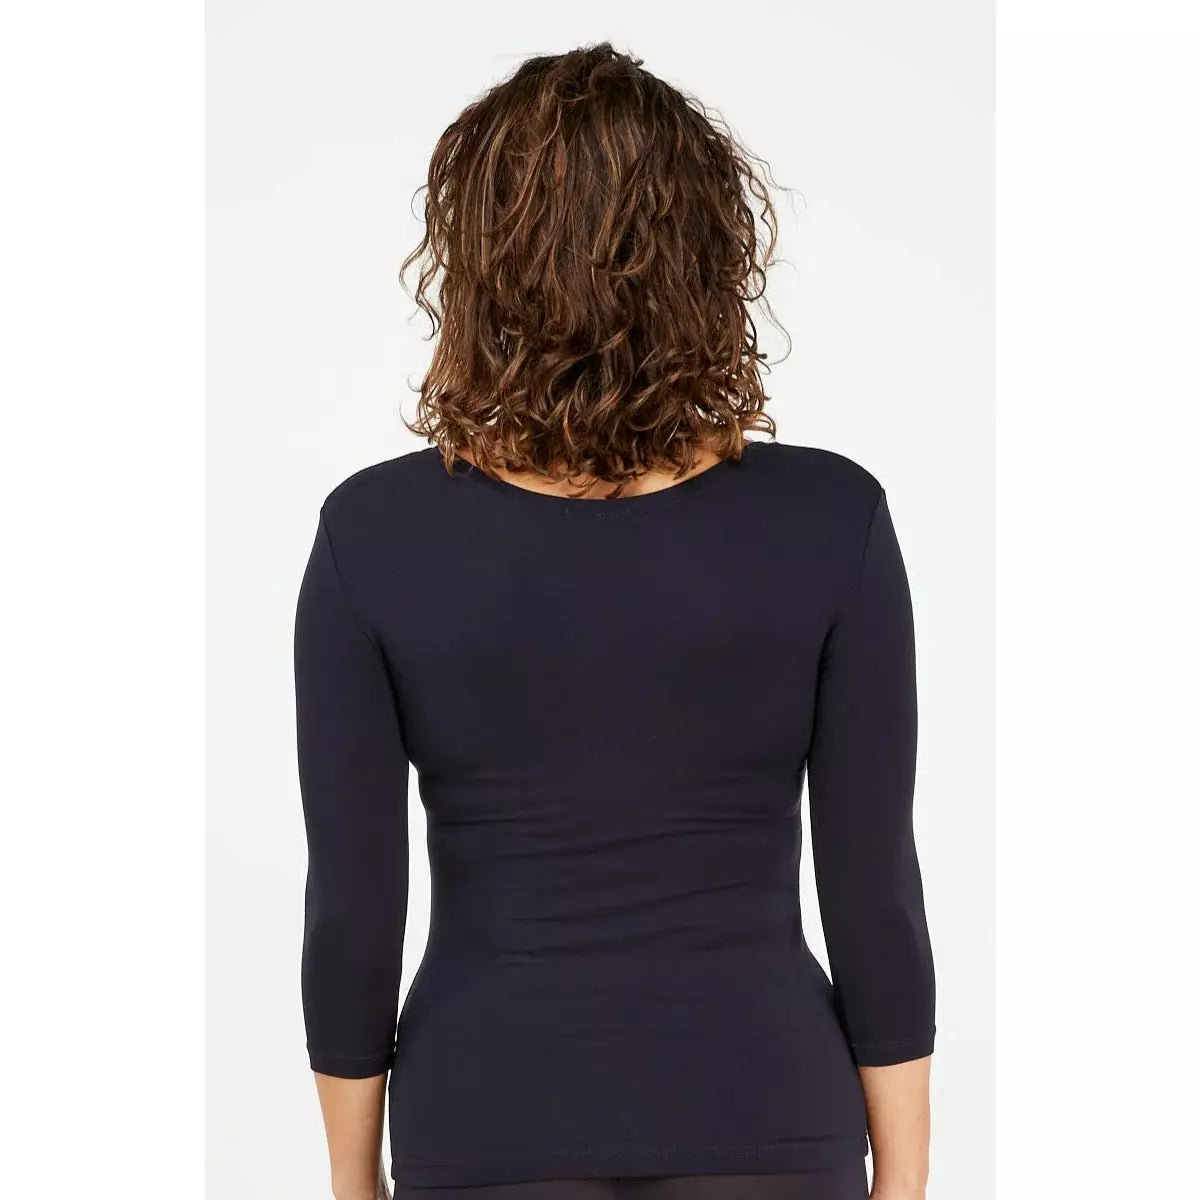 Tani | 3/4 Sleeve Scoop Top | French Navy